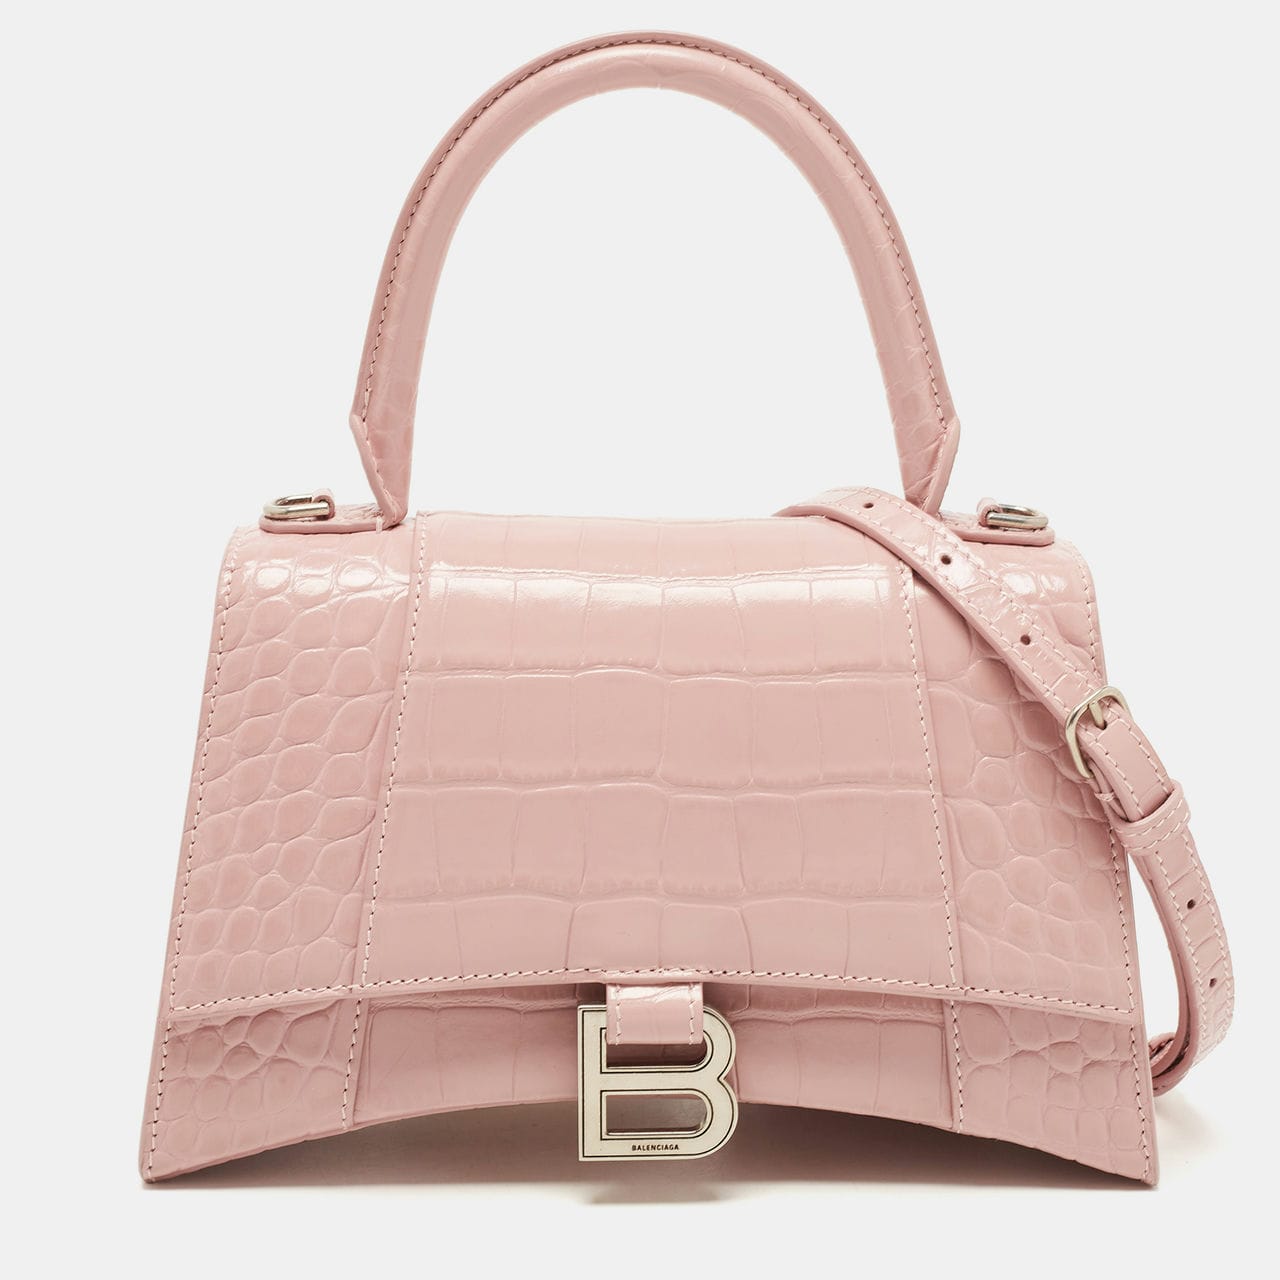 Blush pink + baby pink, my two favorites!! I'm literally obsessed with  these two shades, especially when it comes to handba… | Pink handbags,  Bags, Handbag hardware